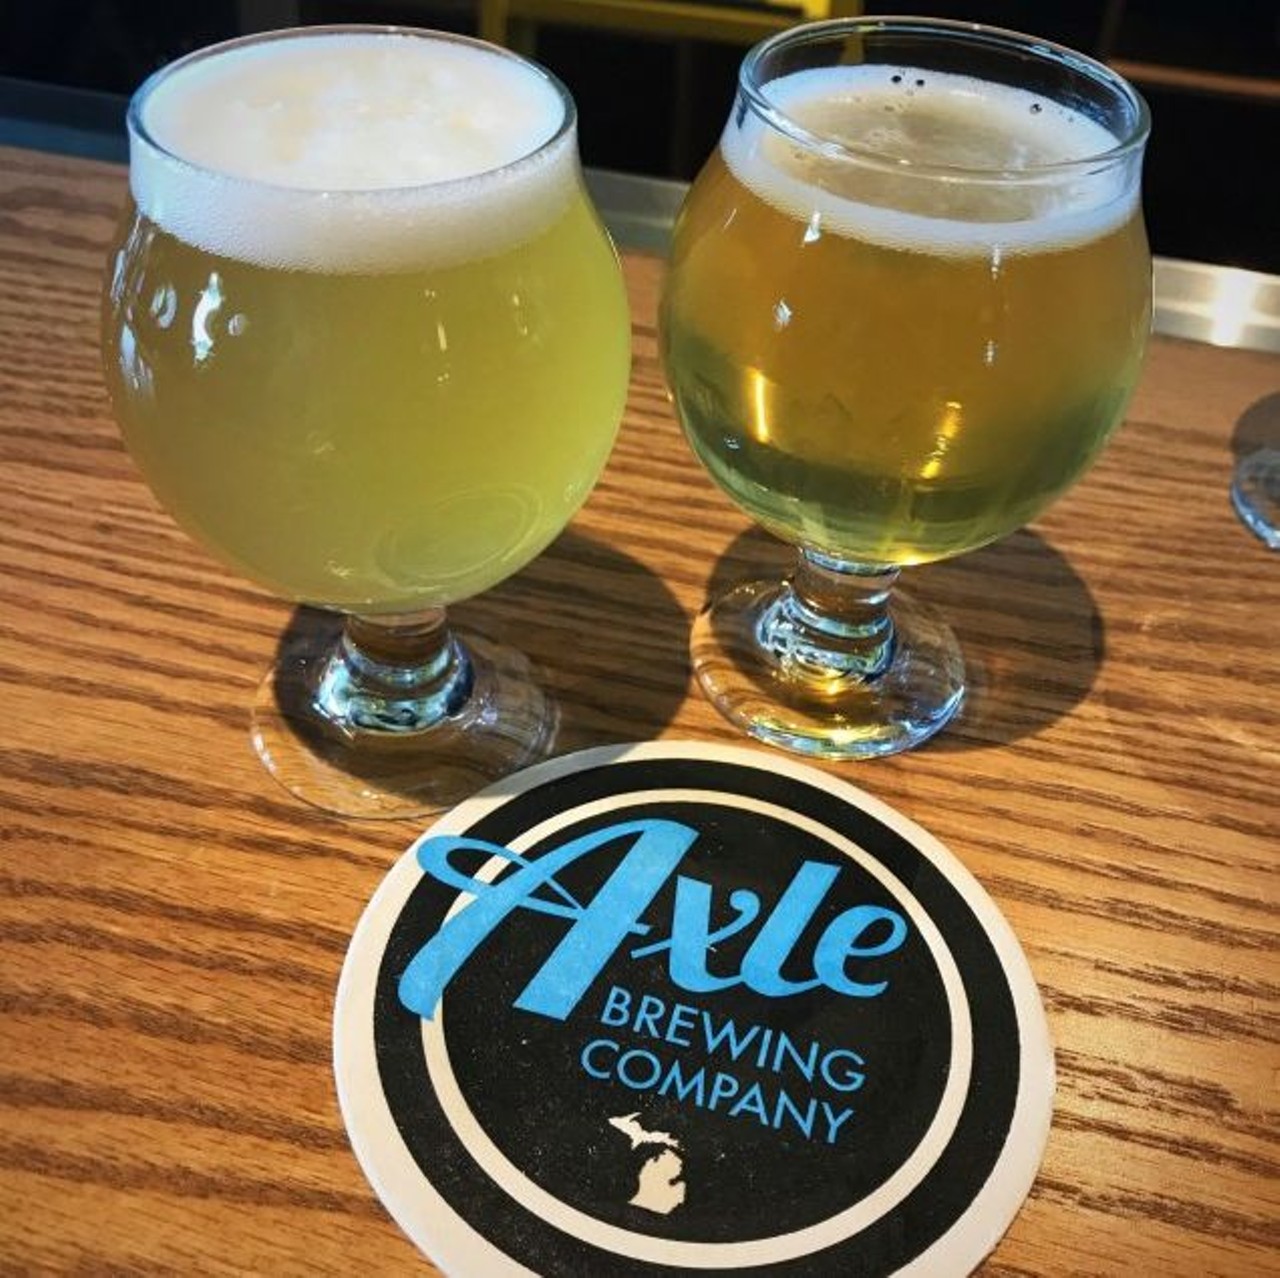 Jolene - Axle Brewing 
ABV: 4.5% 
Honestly, the best part of drinking this beer is that you mentally hear Dolly Parton crooning "Jolene" in the back of your head while you're taking a swig. And if you don't hear Dolly, then you're drinking it wrong. Thank you Axle Brewing for giving us this beer.